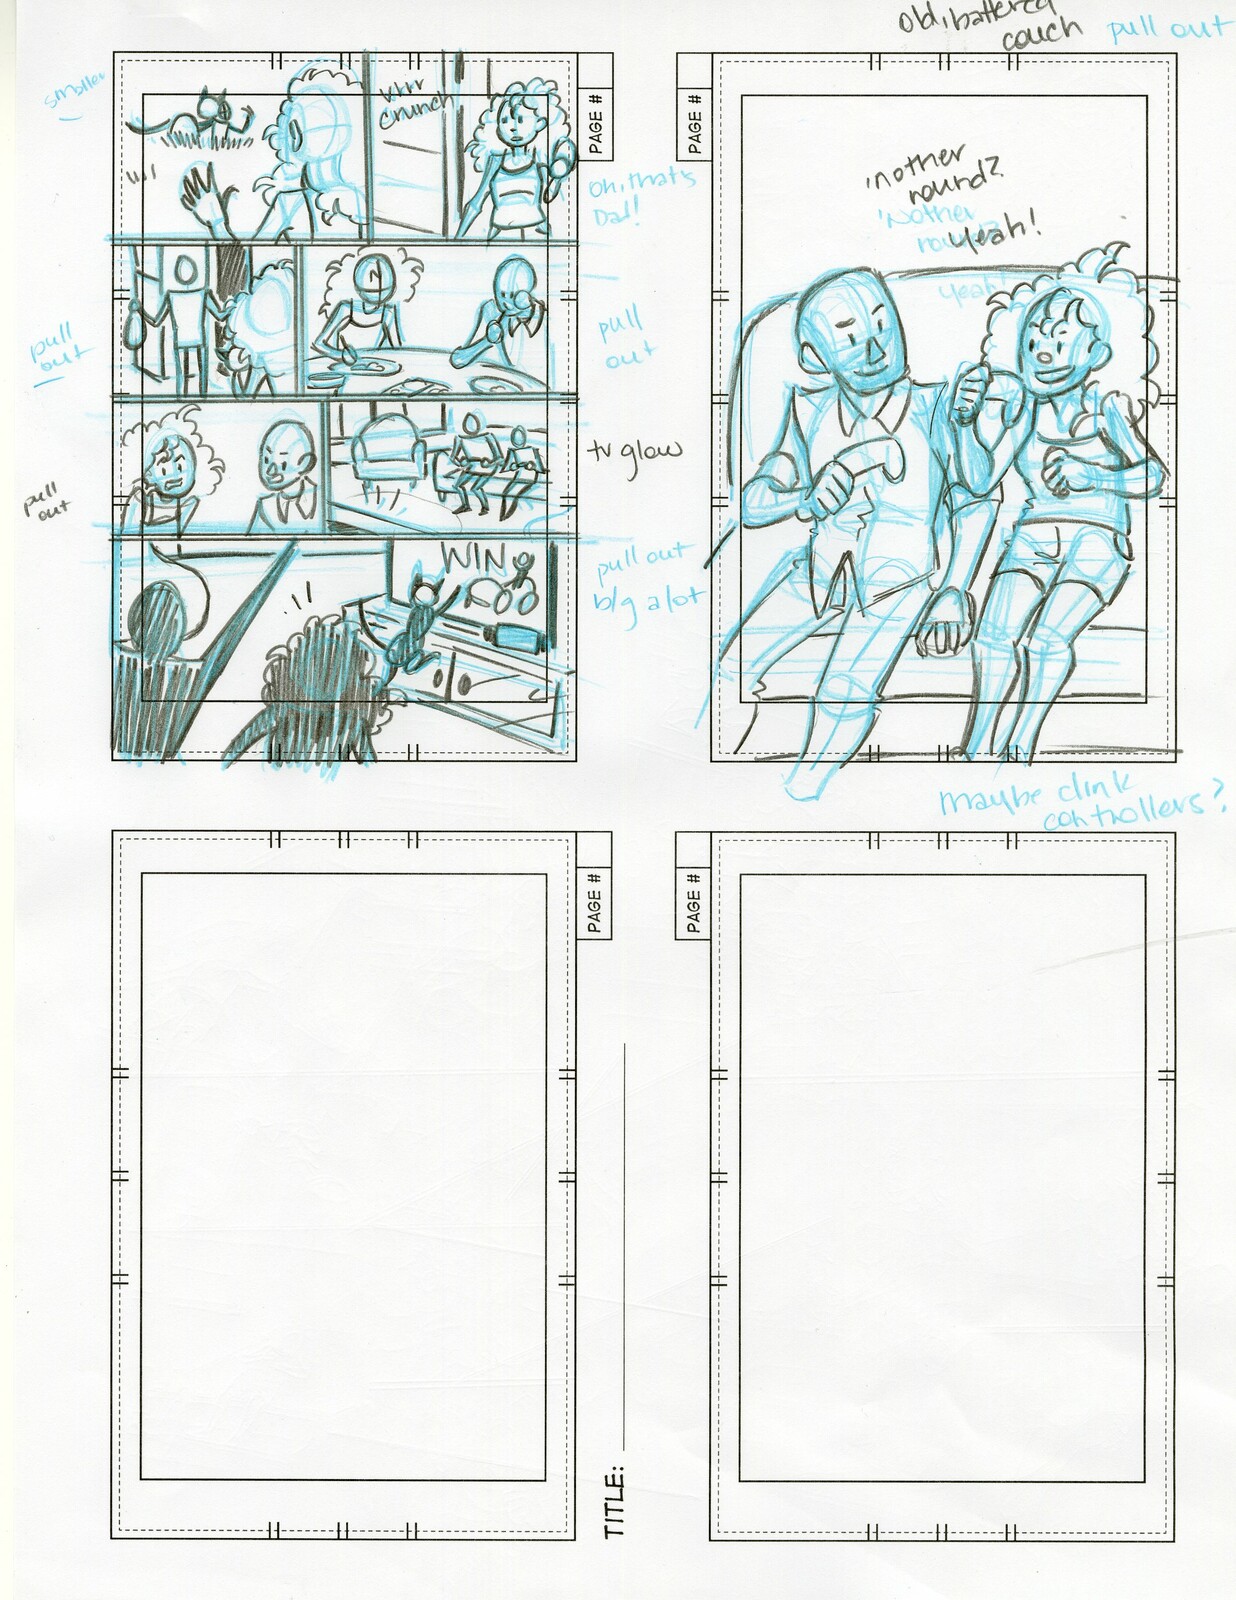 Thumbnails for page 12 and 13.